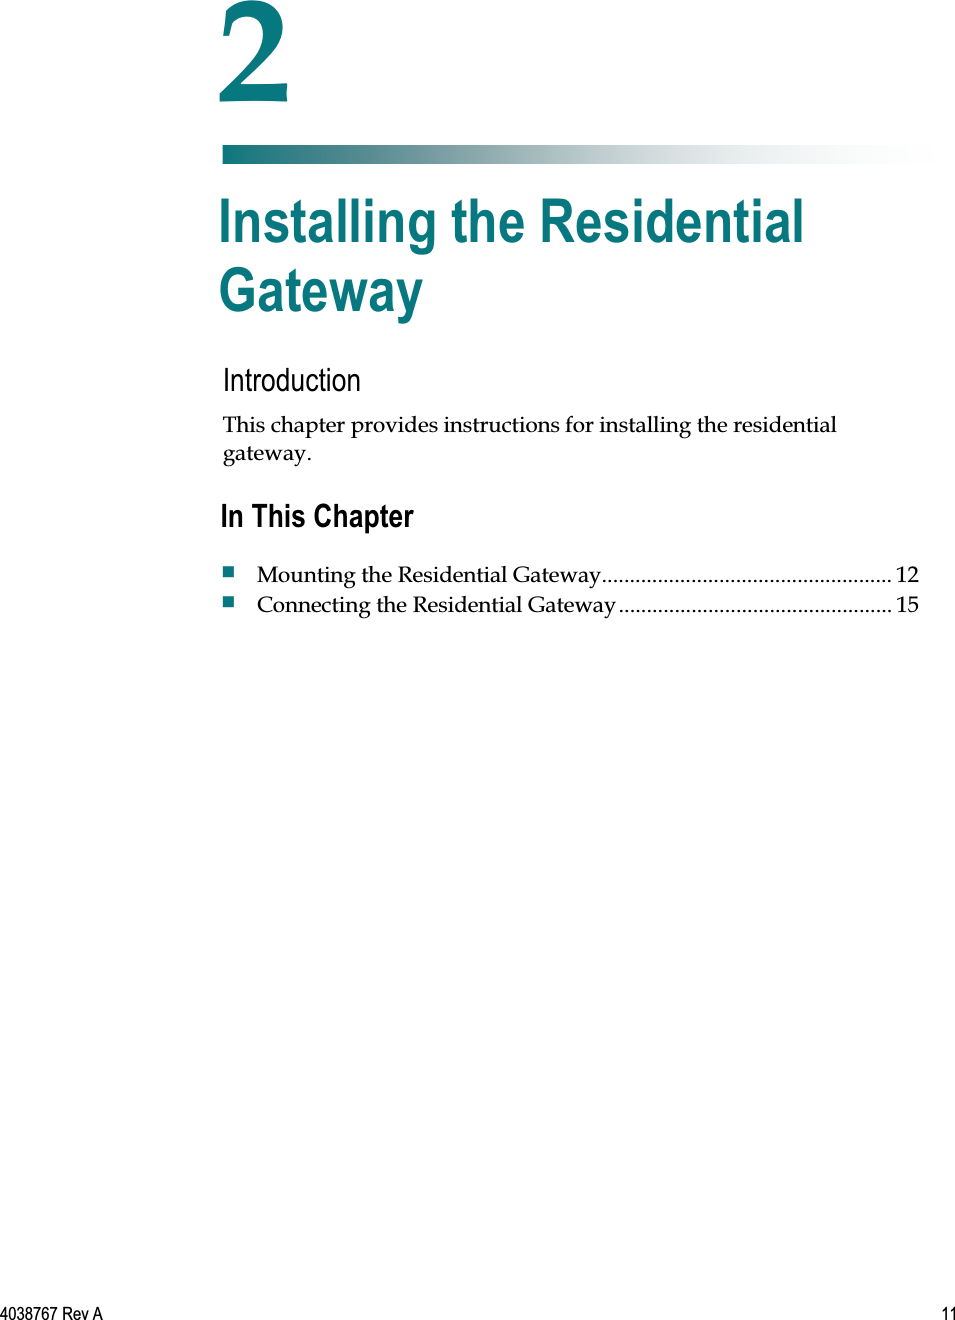   4038767 Rev A  11  Introduction This chapter provides instructions for installing the residential gateway.    2 Chapter 2 Installing the Residential Gateway In This Chapter  Mounting the Residential Gateway .................................................... 12  Connecting the Residential Gateway ................................................. 15 